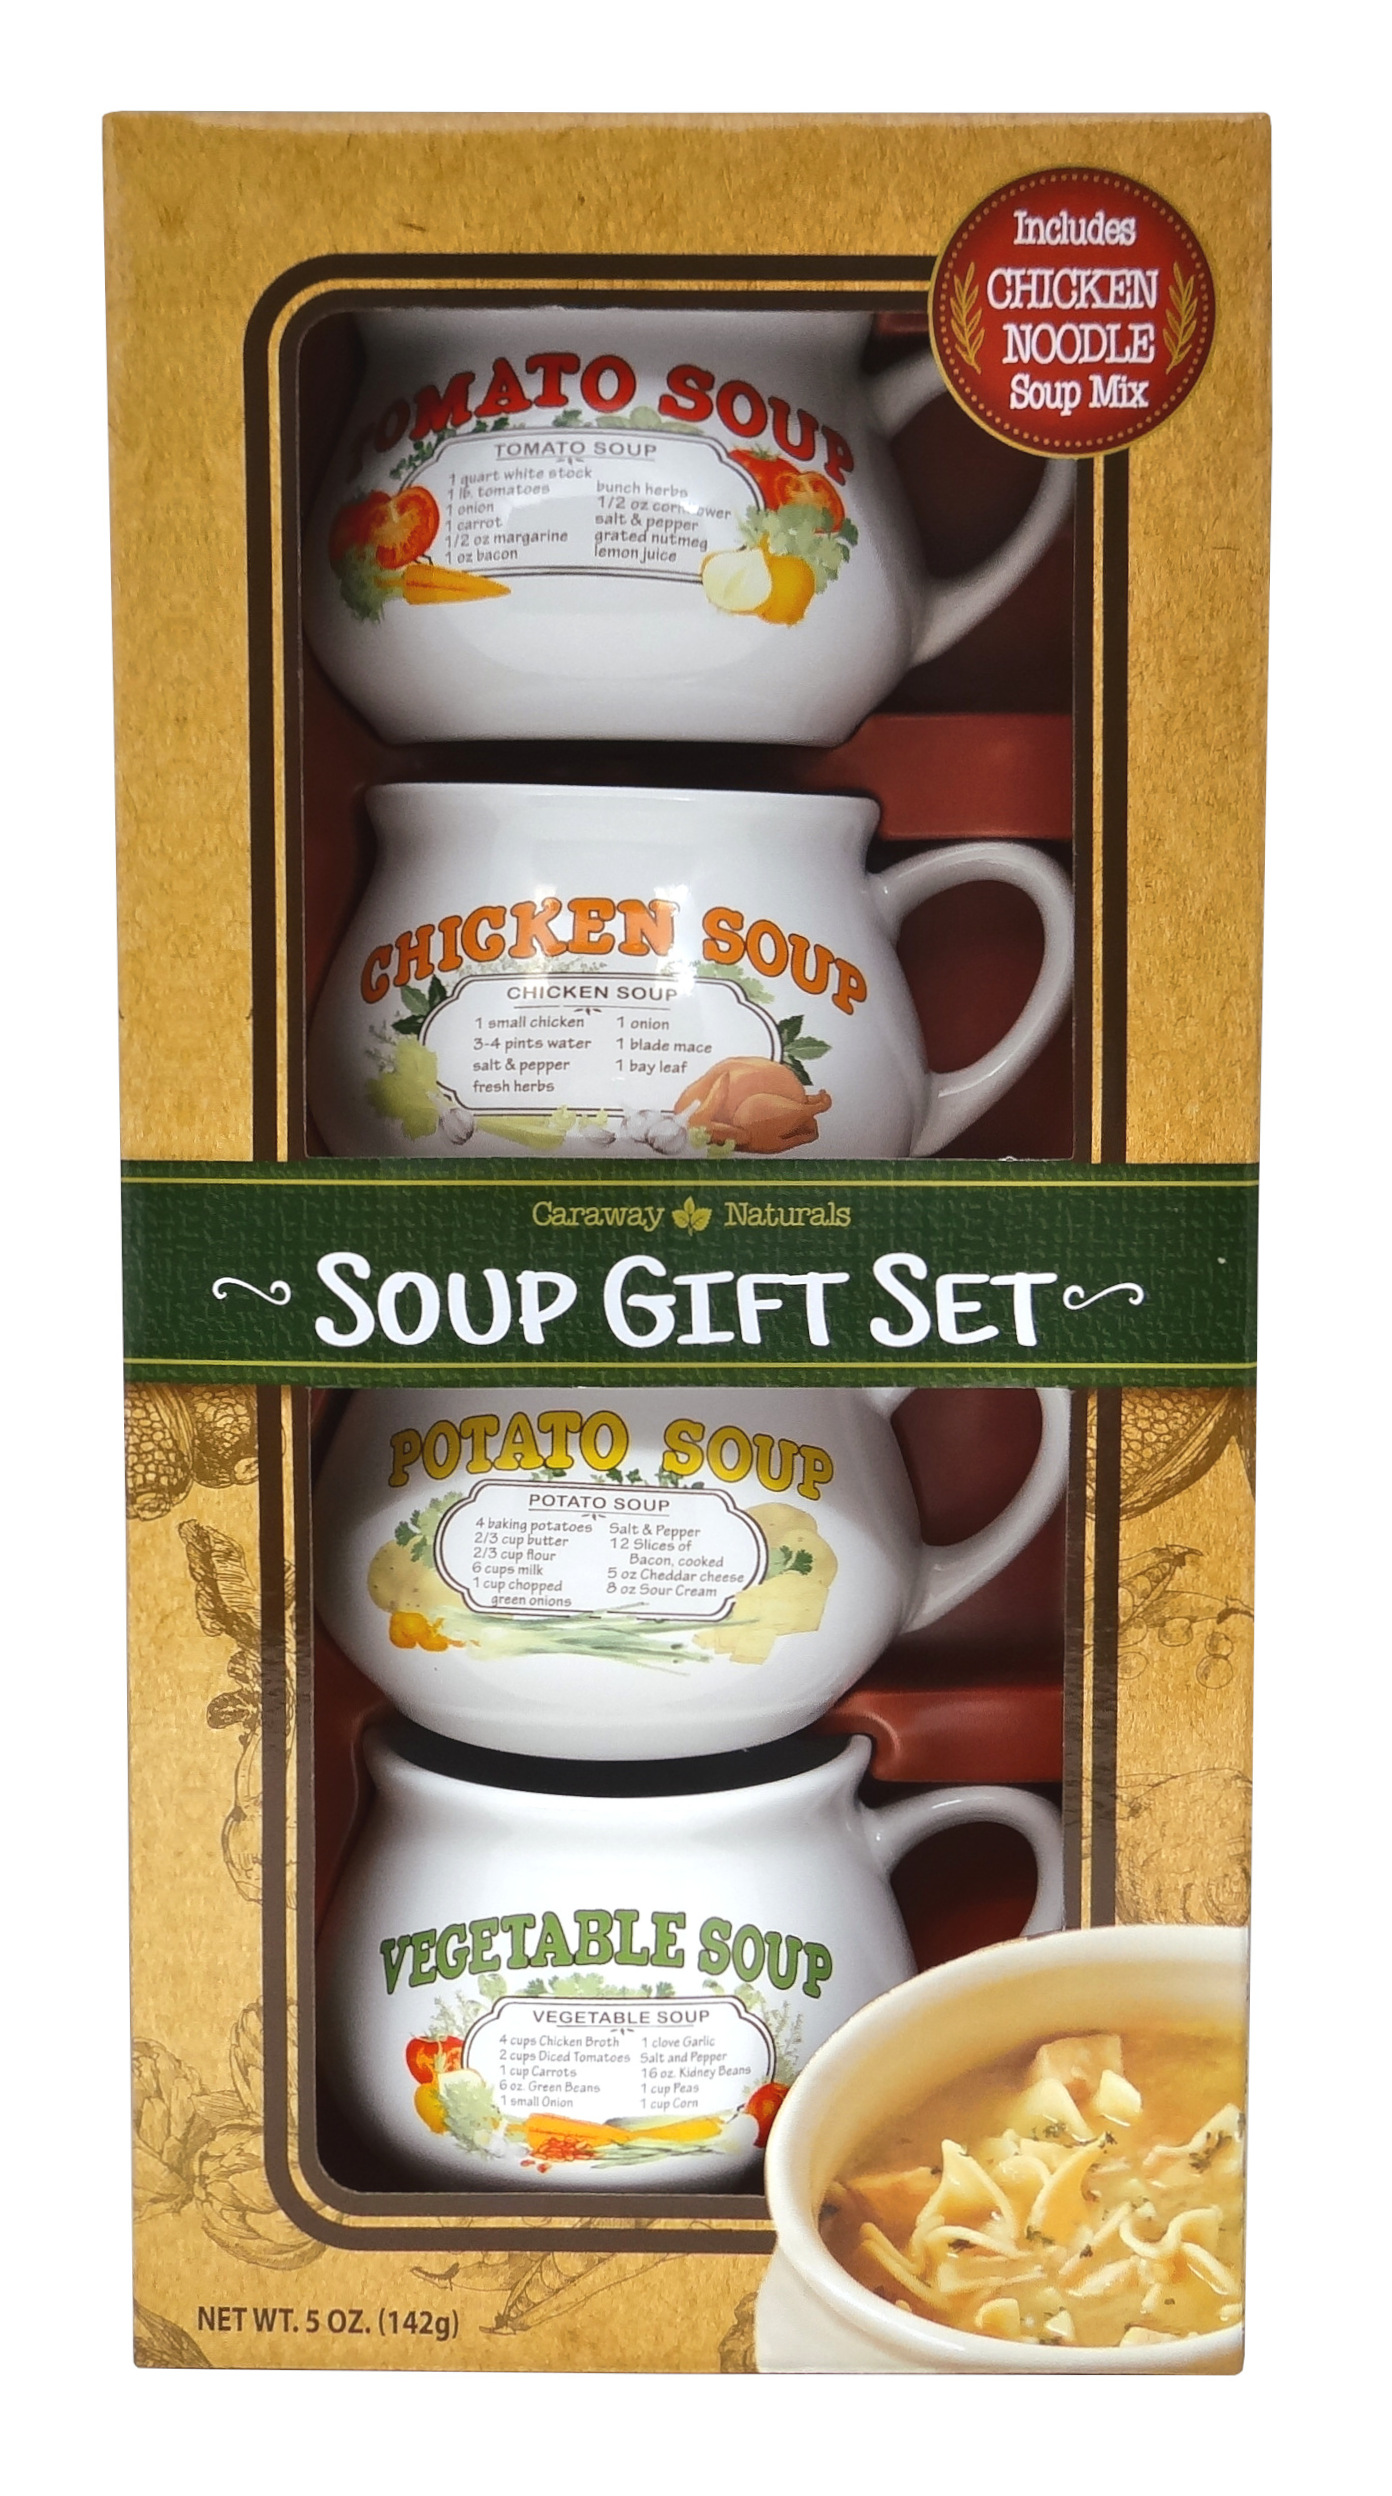 Nostalgic Soup Bowls Box Gift Set with Chicken Noodle Soup Mix by Caraway Naturals, 5oz, 1ct - image 1 of 11